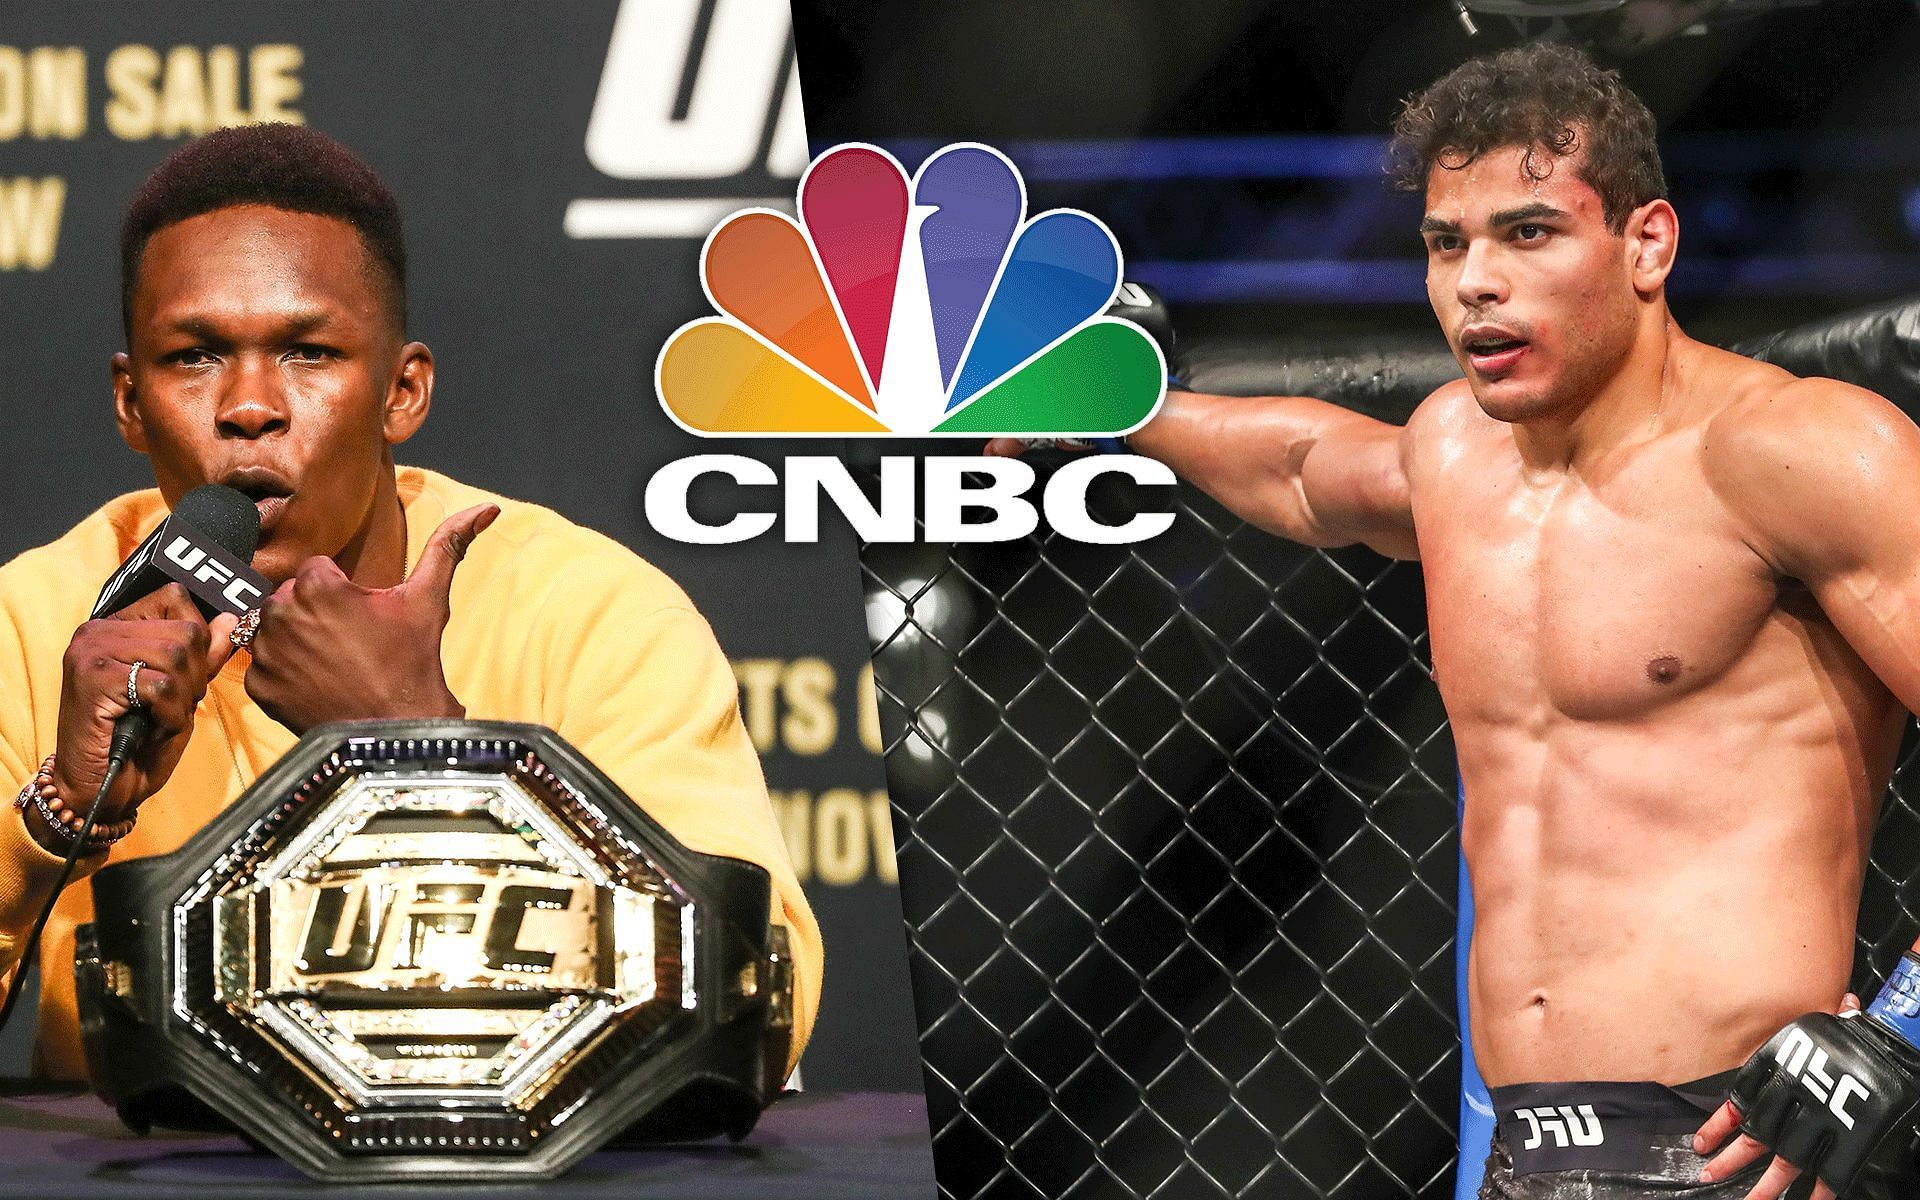 Israel Adesanya (left), Paulo Costa (right) [Image courtesy of @CNBC on Instagram]